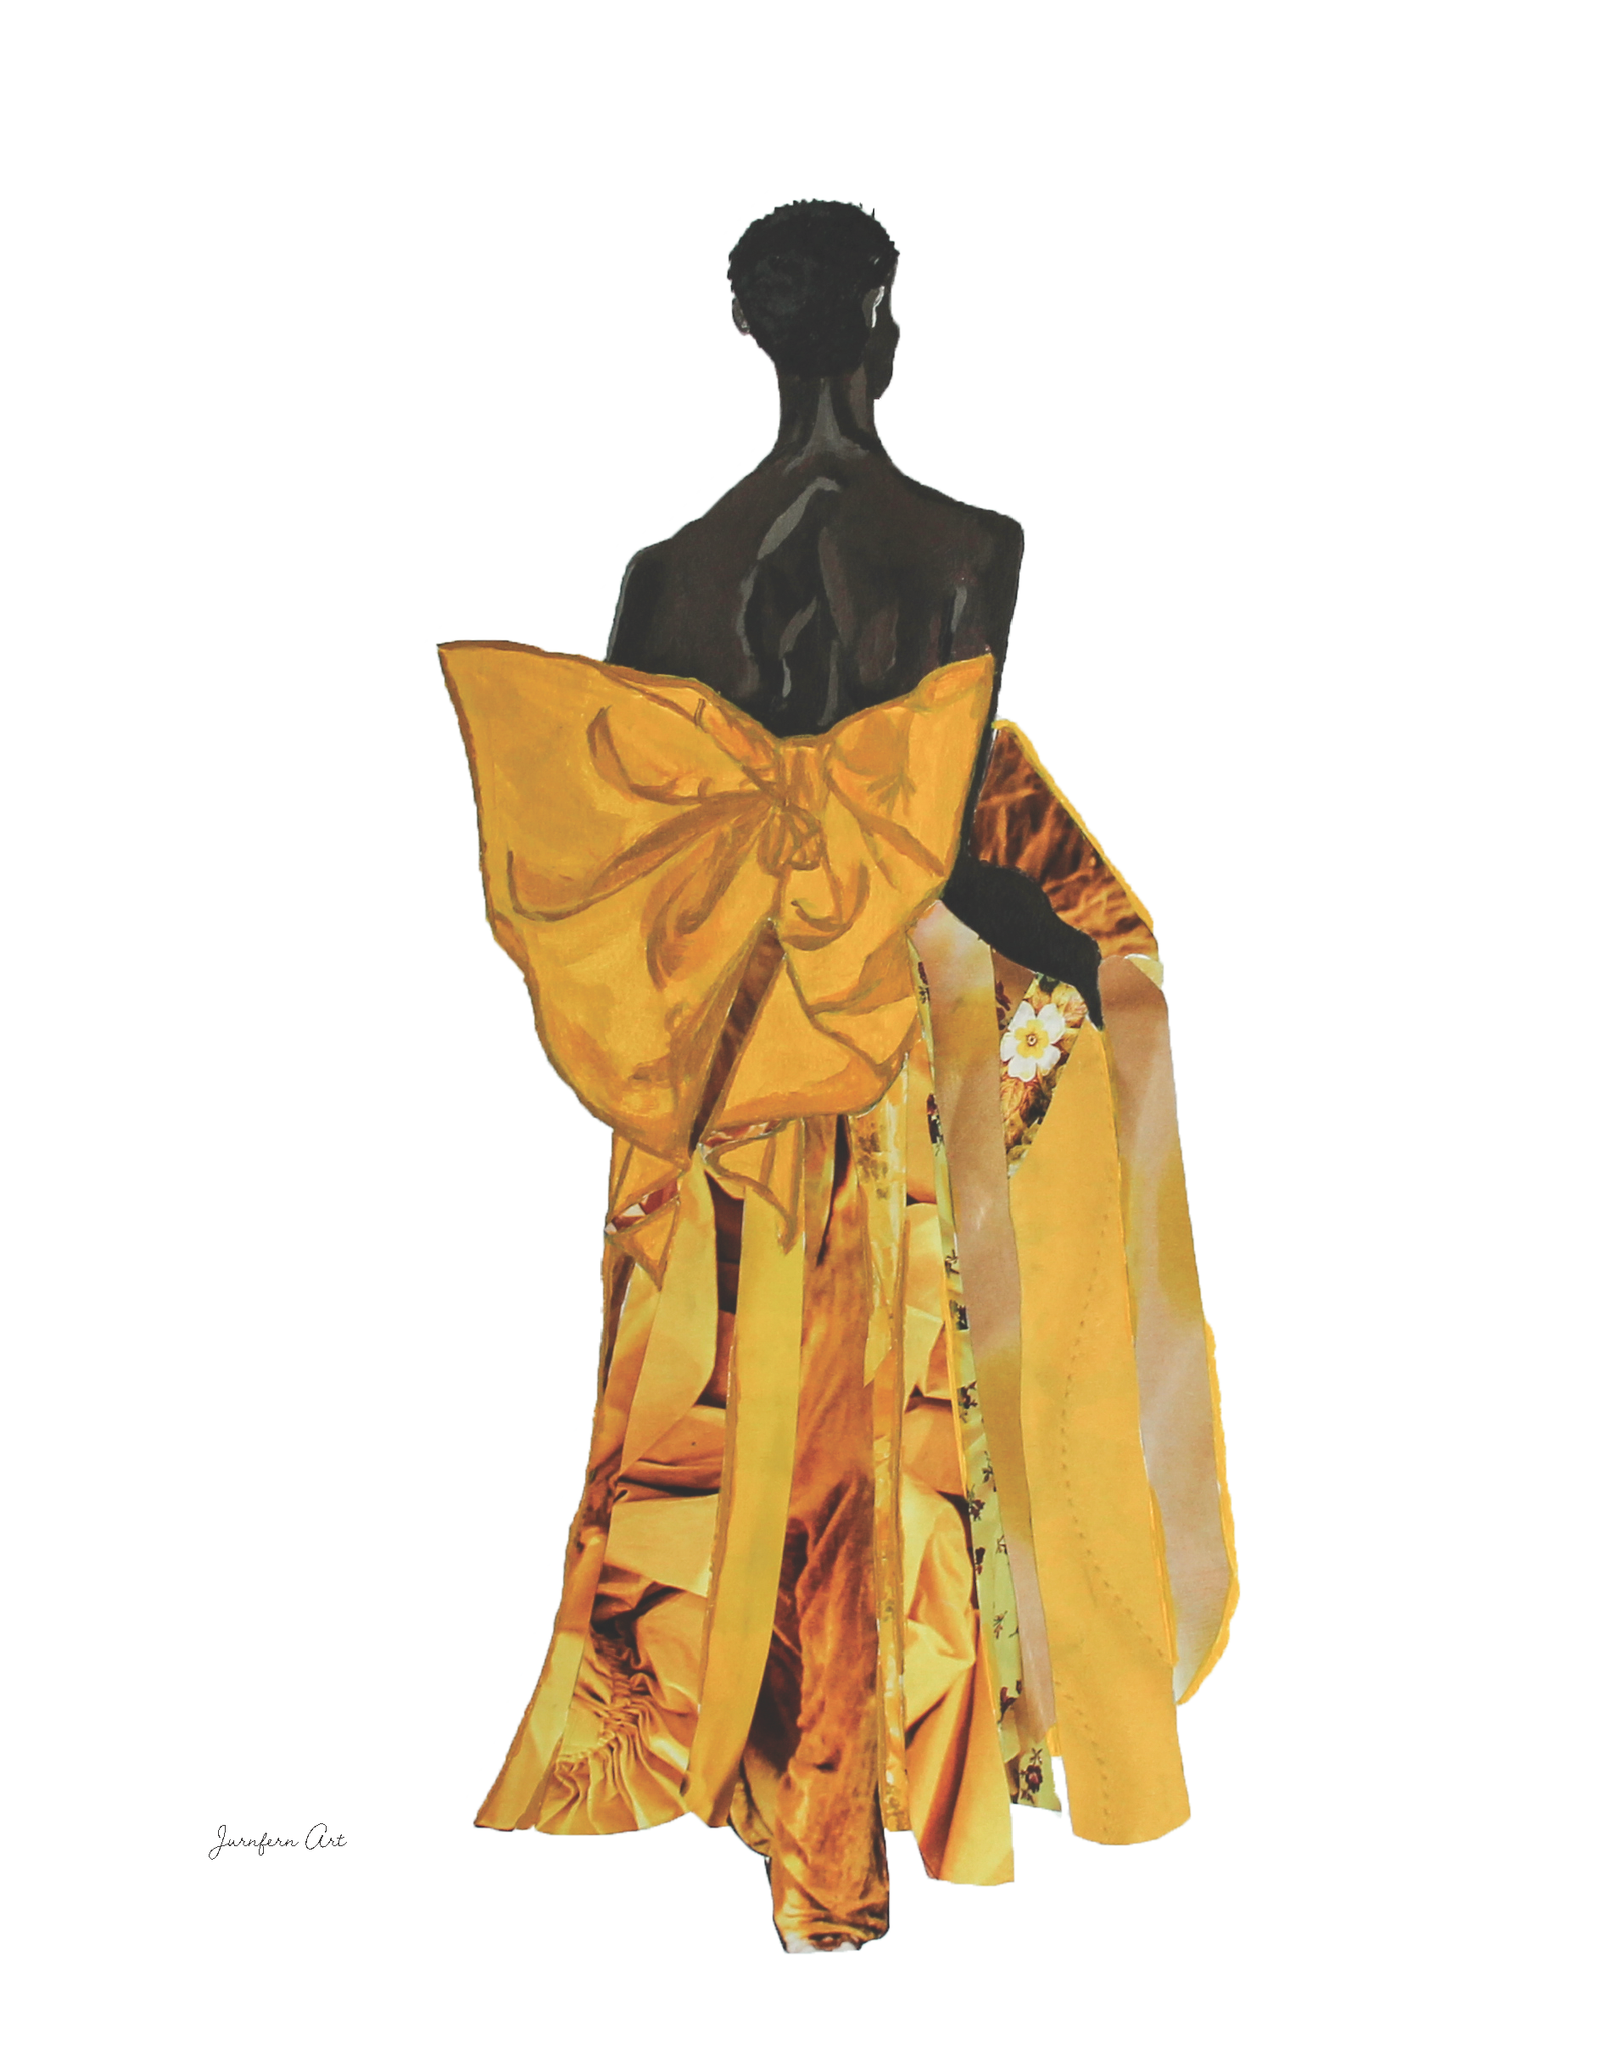 A collage fashion illustration of Black model Akiima Ajak wearing a yellow Valentino gown with a large bow on the back, and a white background